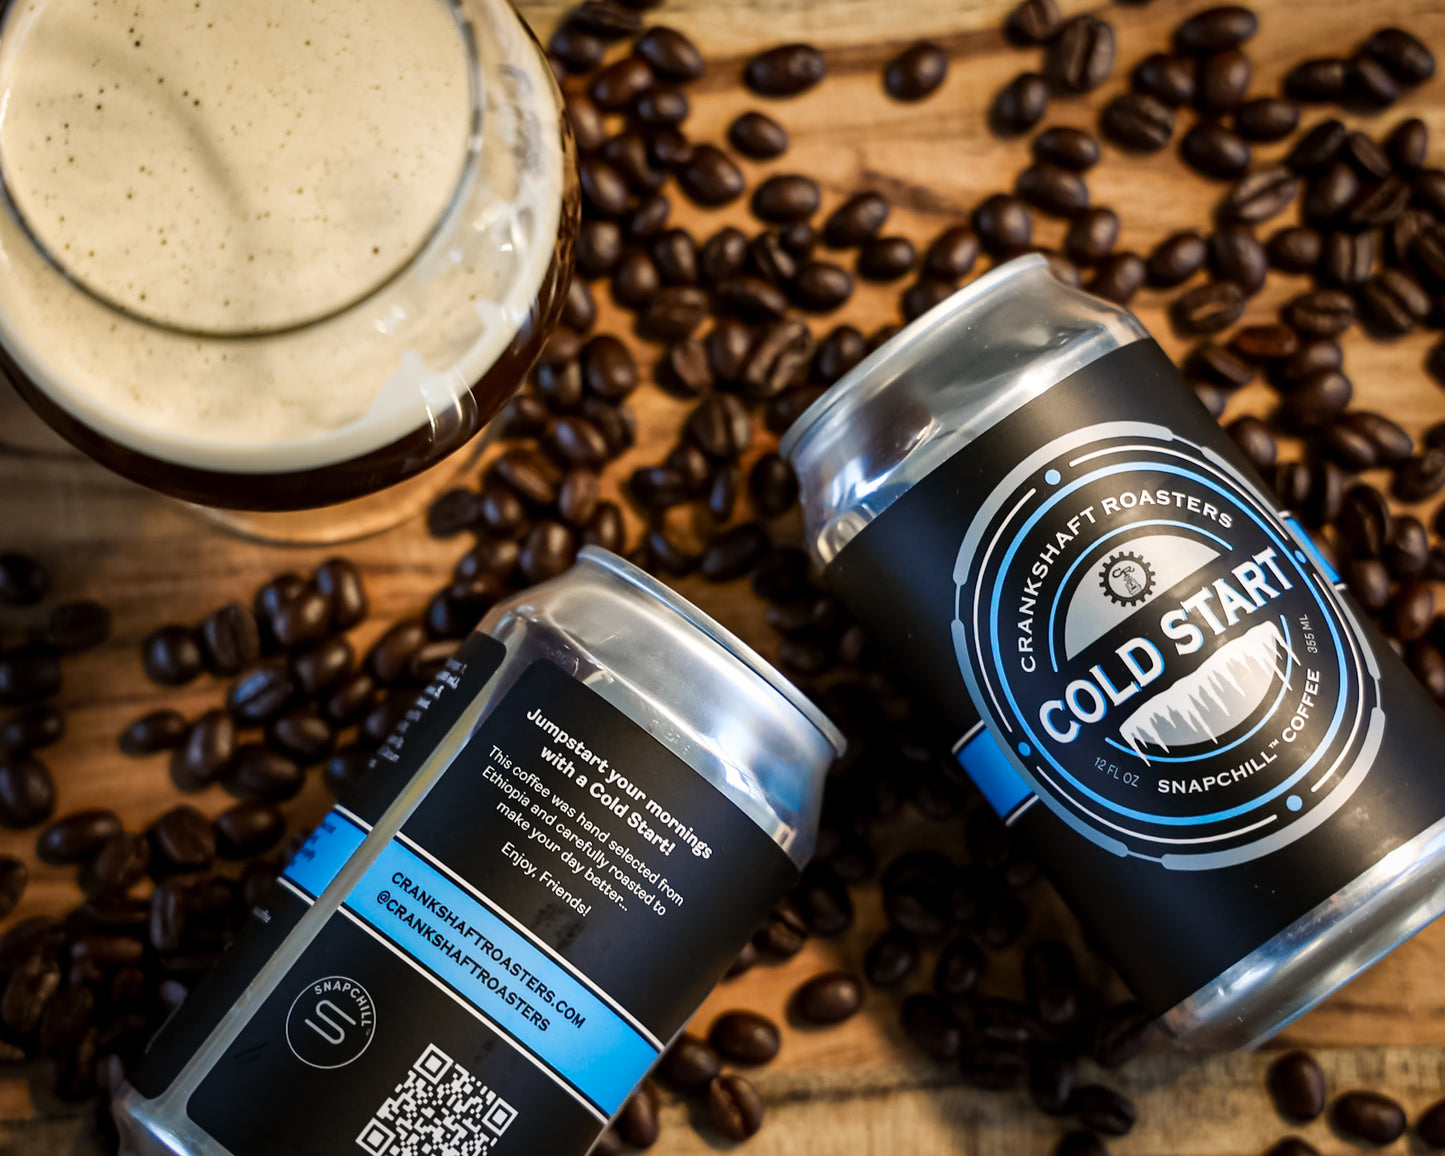 Cold Start Canned Coffee 8-Pack